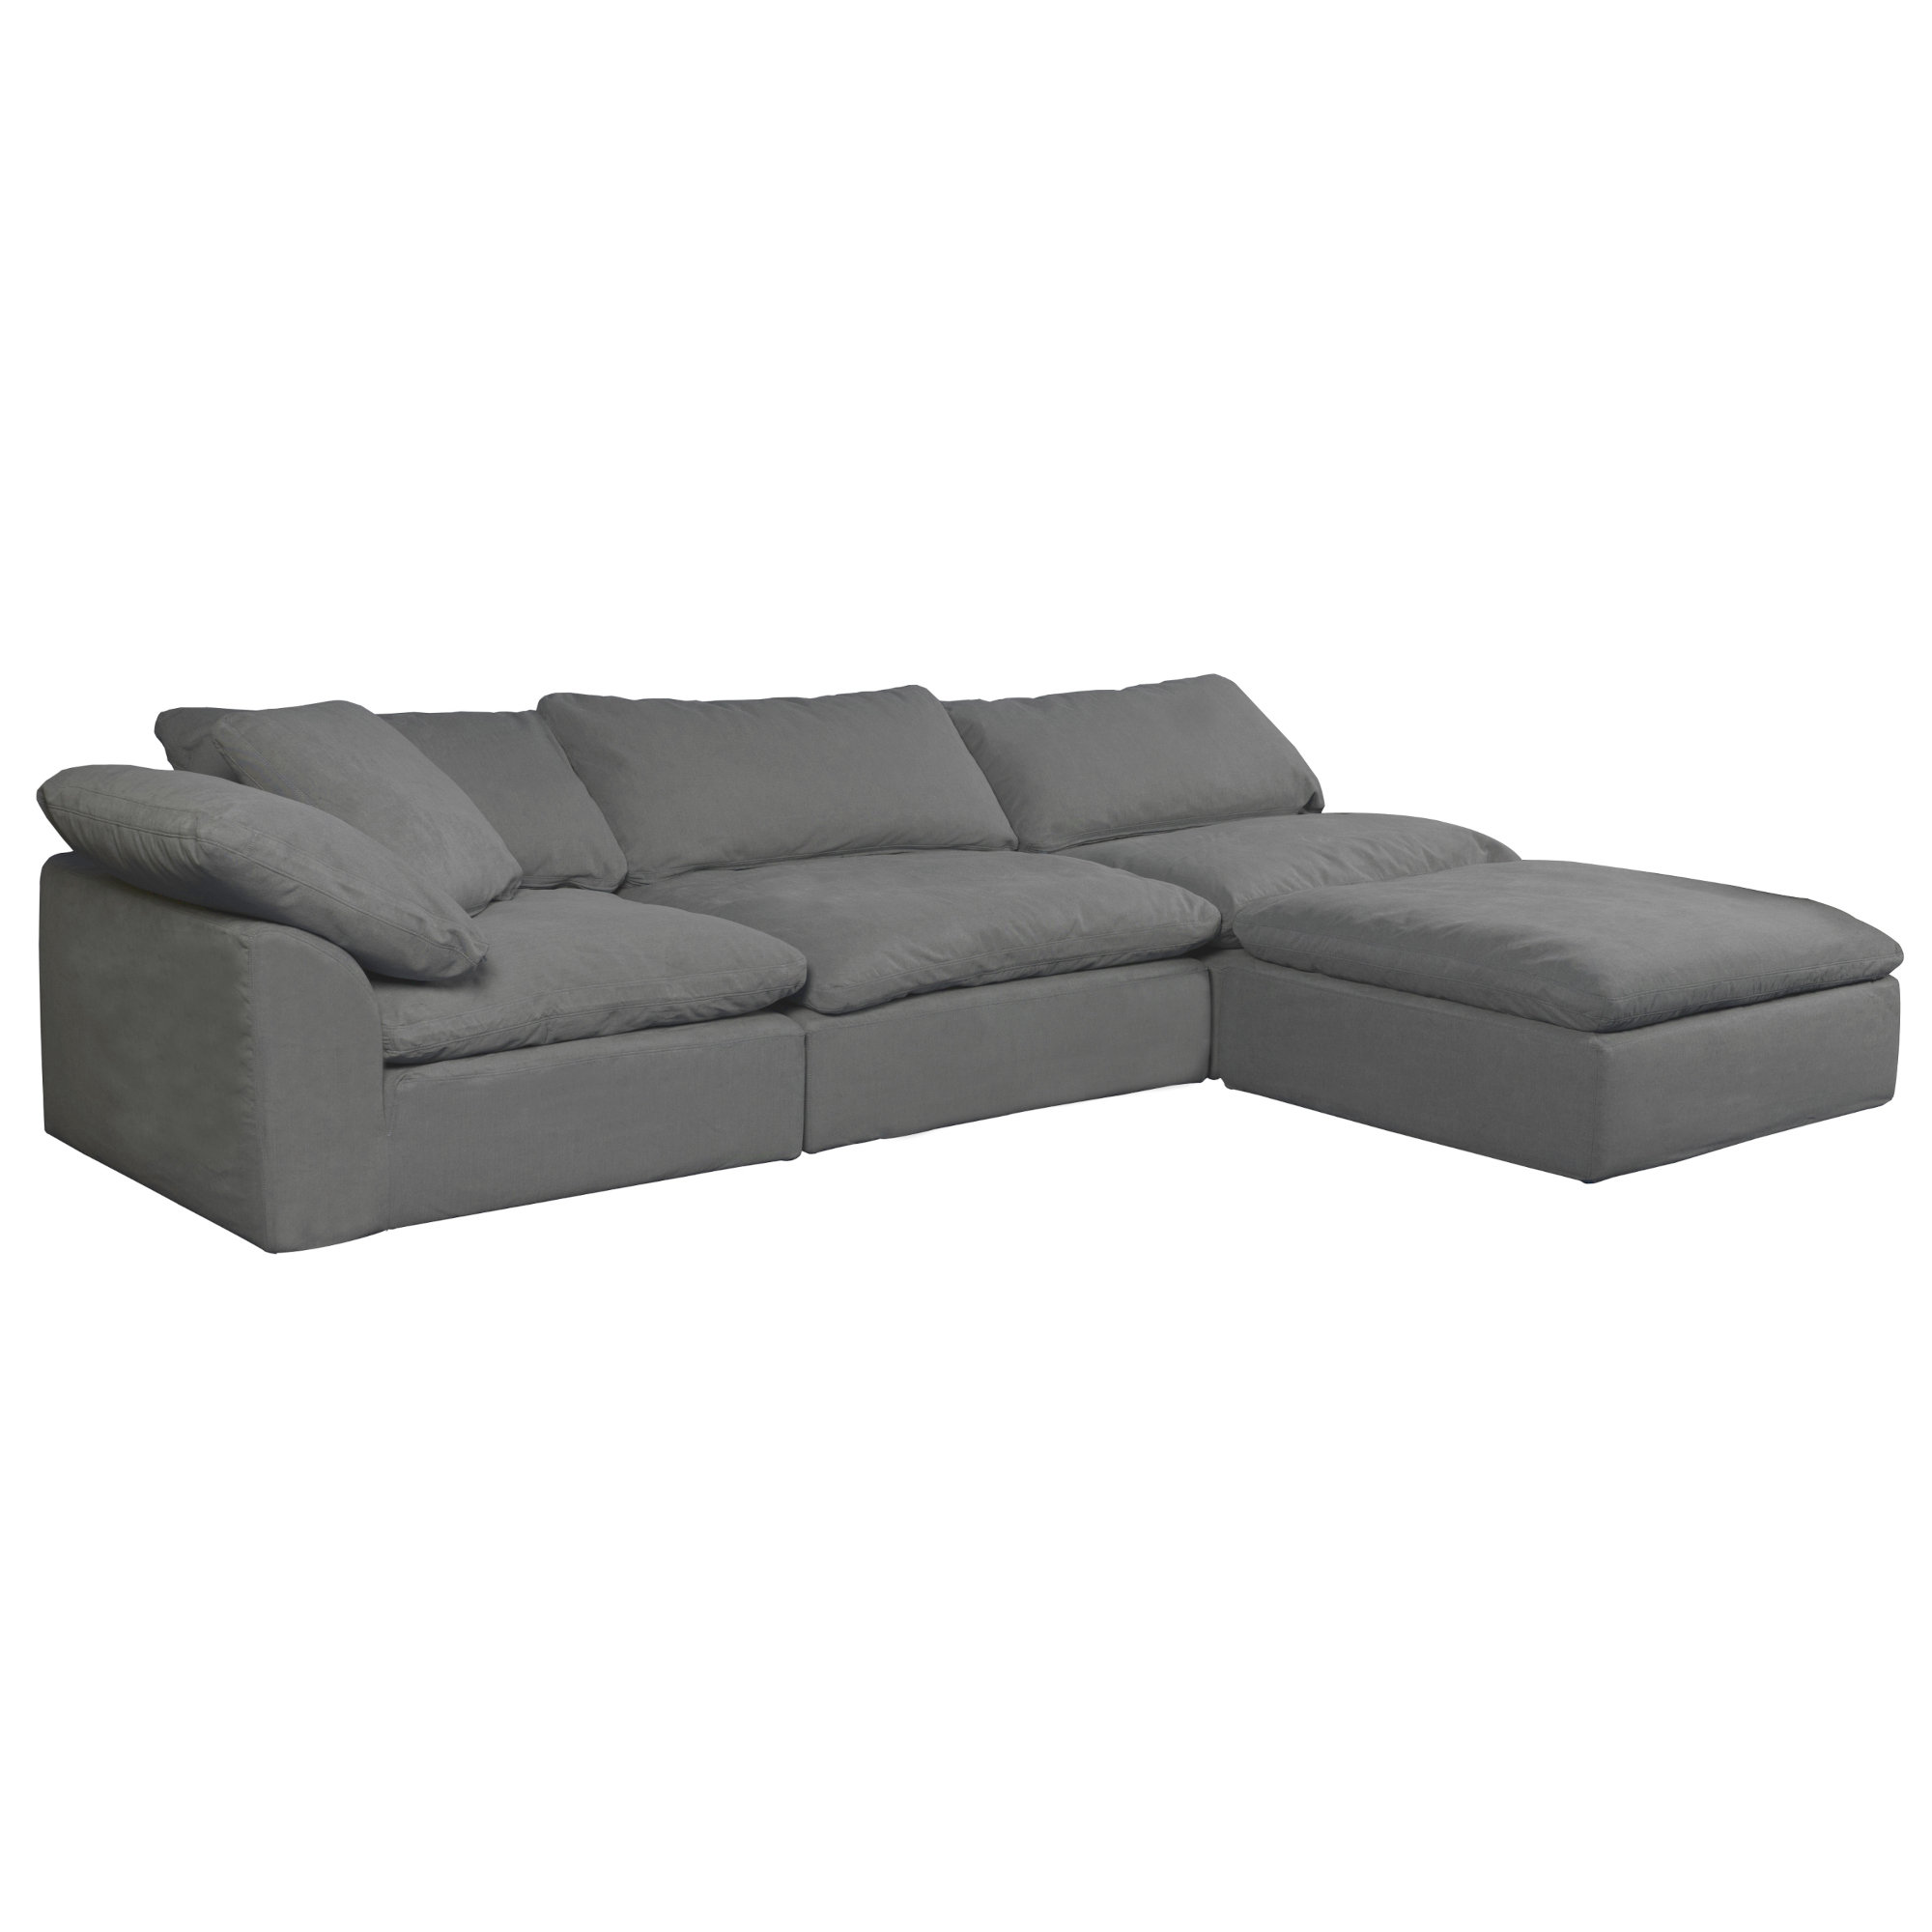 Sunset Trading Contemporary Puff Collection 4PC Slipcovered Modular  Sectional Sofa with Ottoman | Performance Fabric Washable Water-Resistant